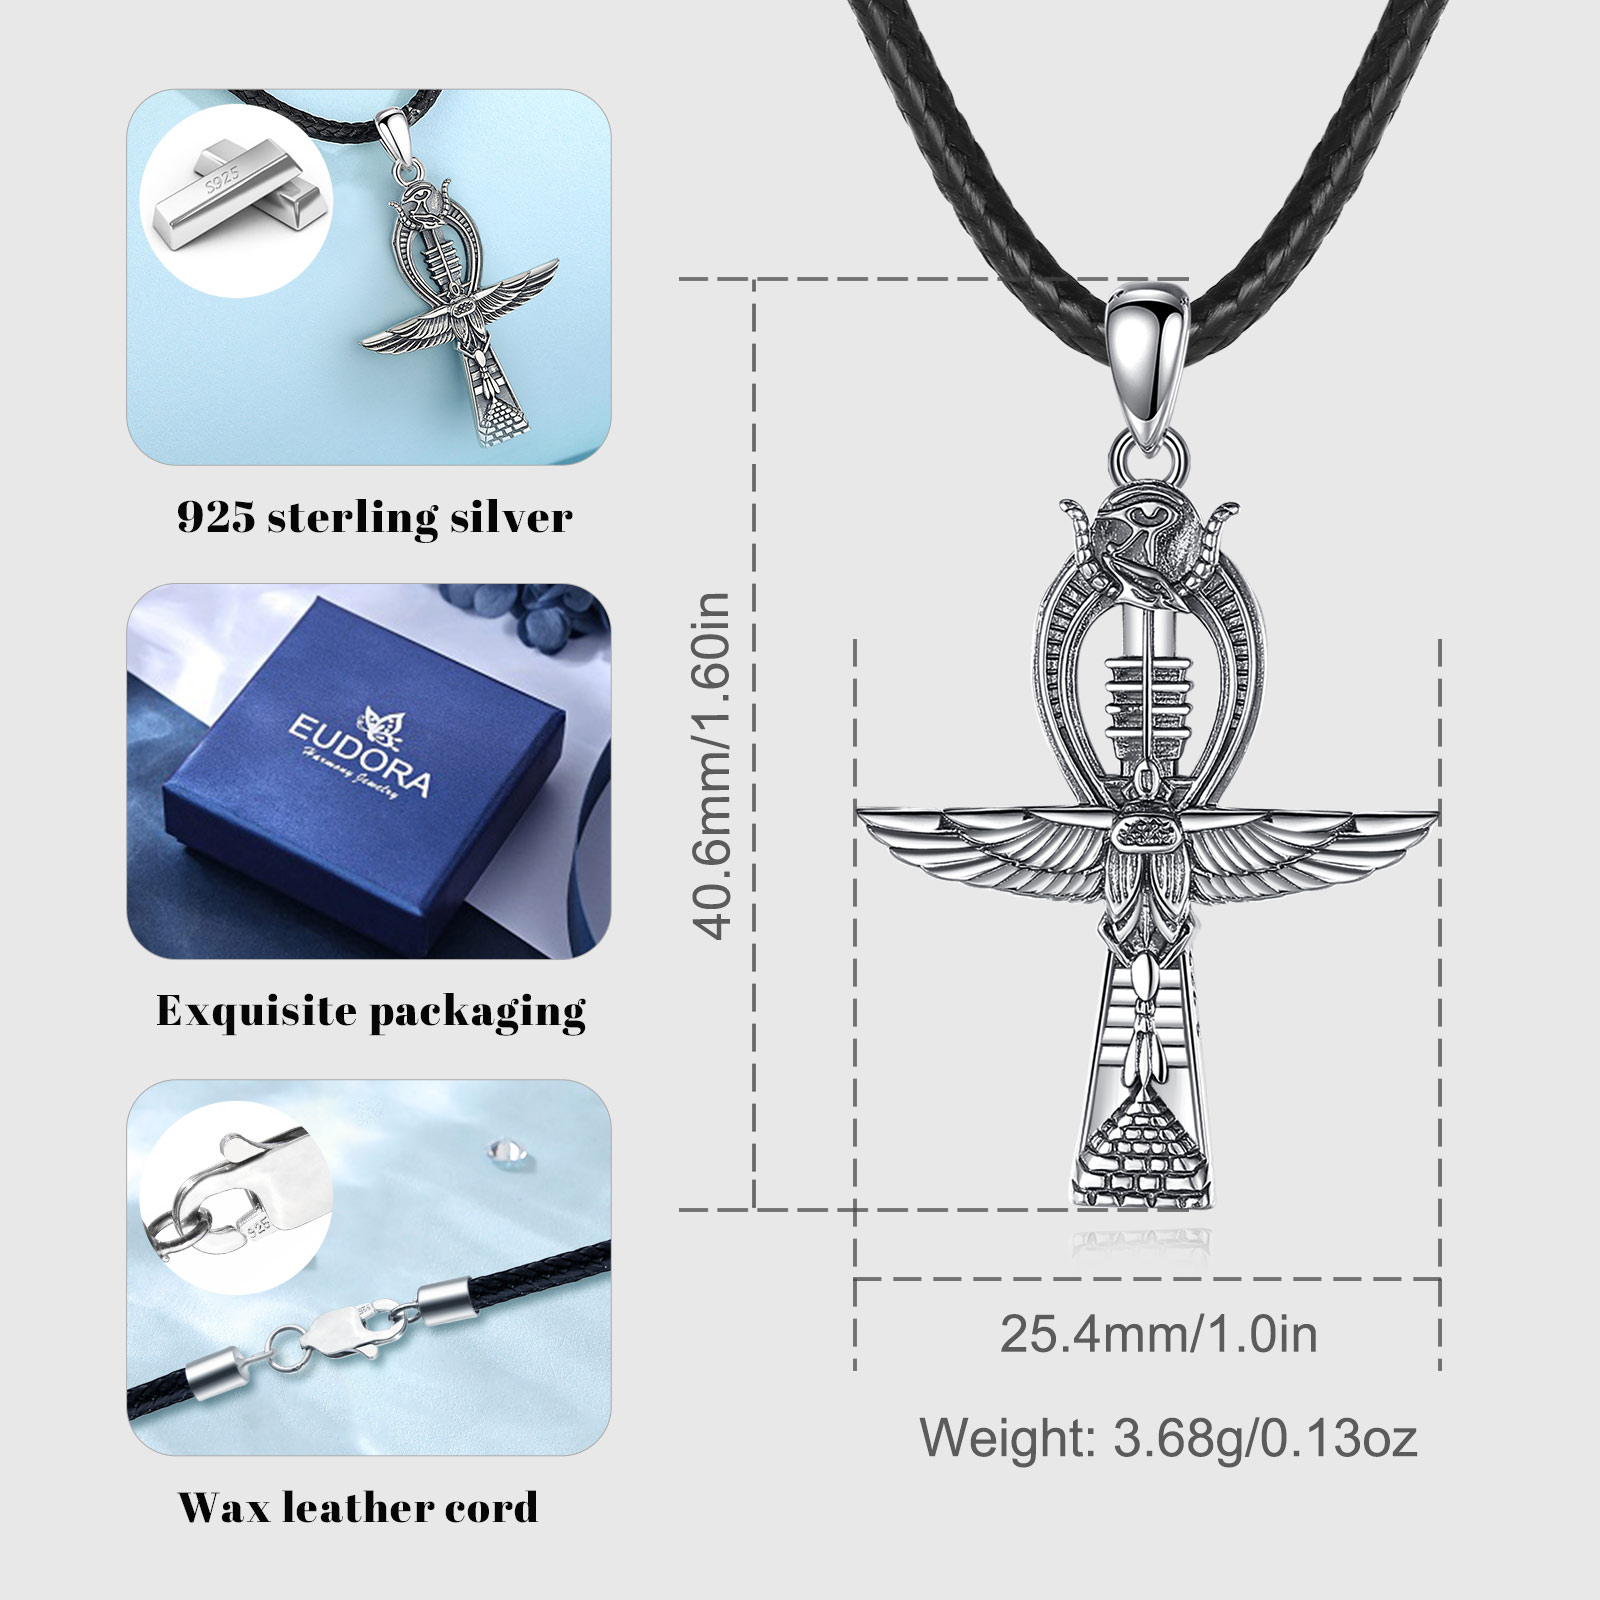 Eudora 925 Sterling Silver Ankh Cross Necklace for Women Man Eagle Scarab Eye Of Horus Amulet Pendant Egyptian Jewelry Fine Gift